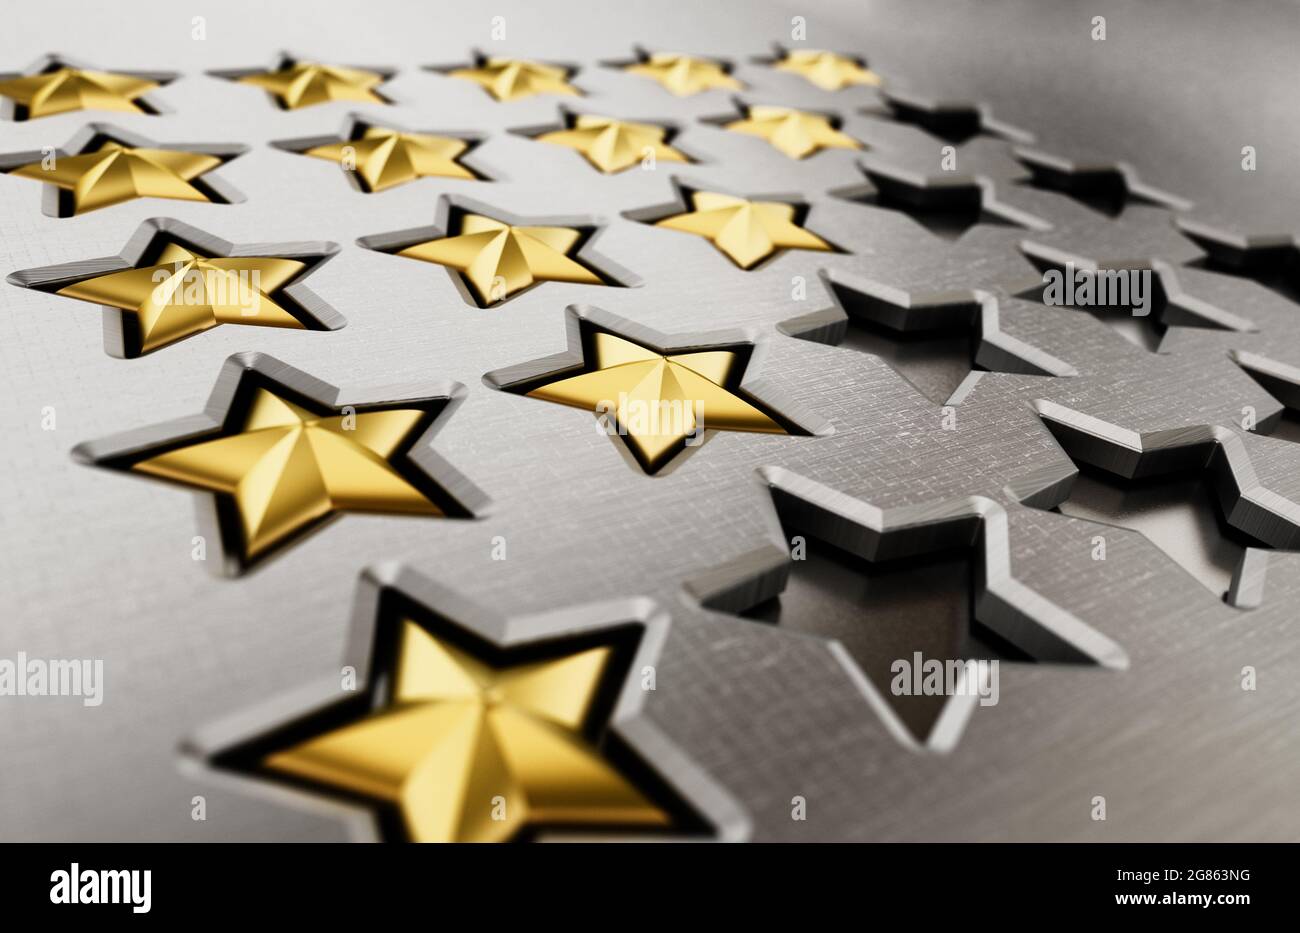 Rating stars table with 5,4,3,2,1 stars. 3D illustration. Stock Photo